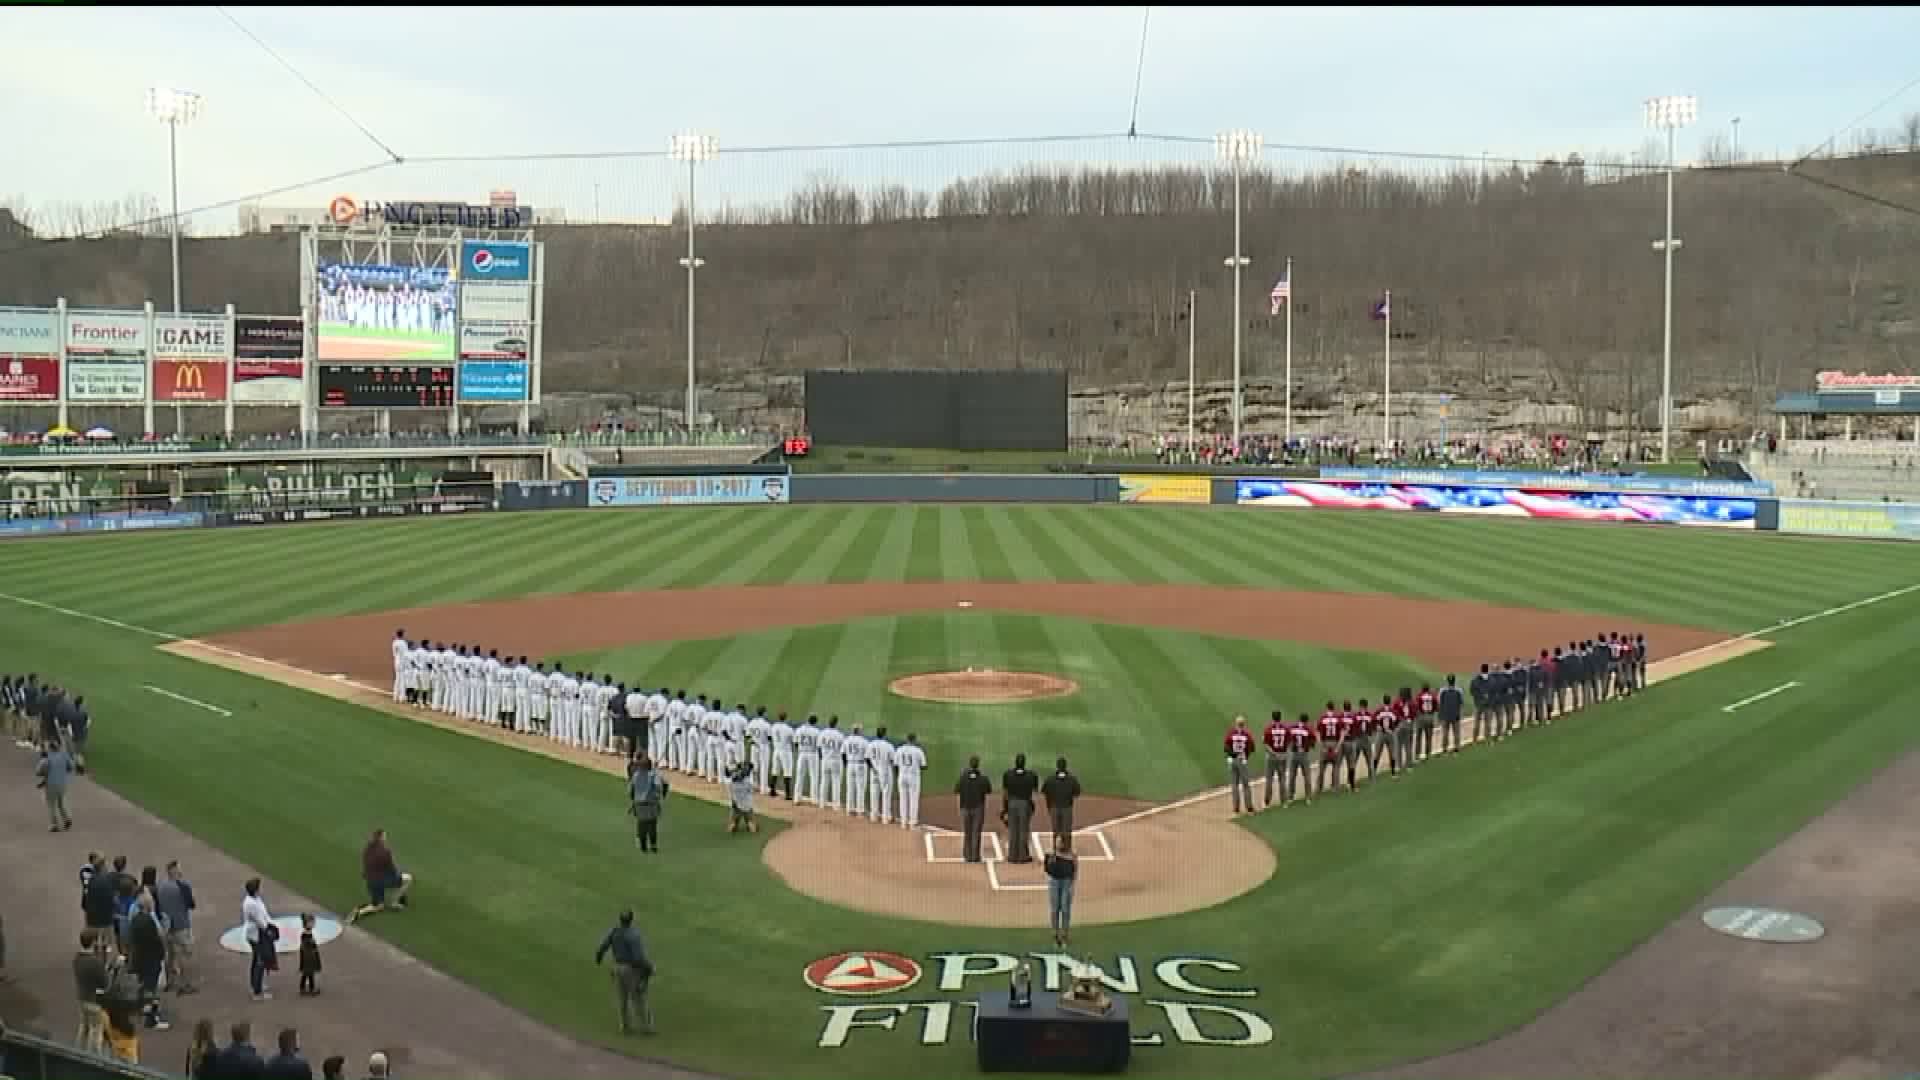 Baseball Fans Flocked to PNC Field for RailRiders Home Opener